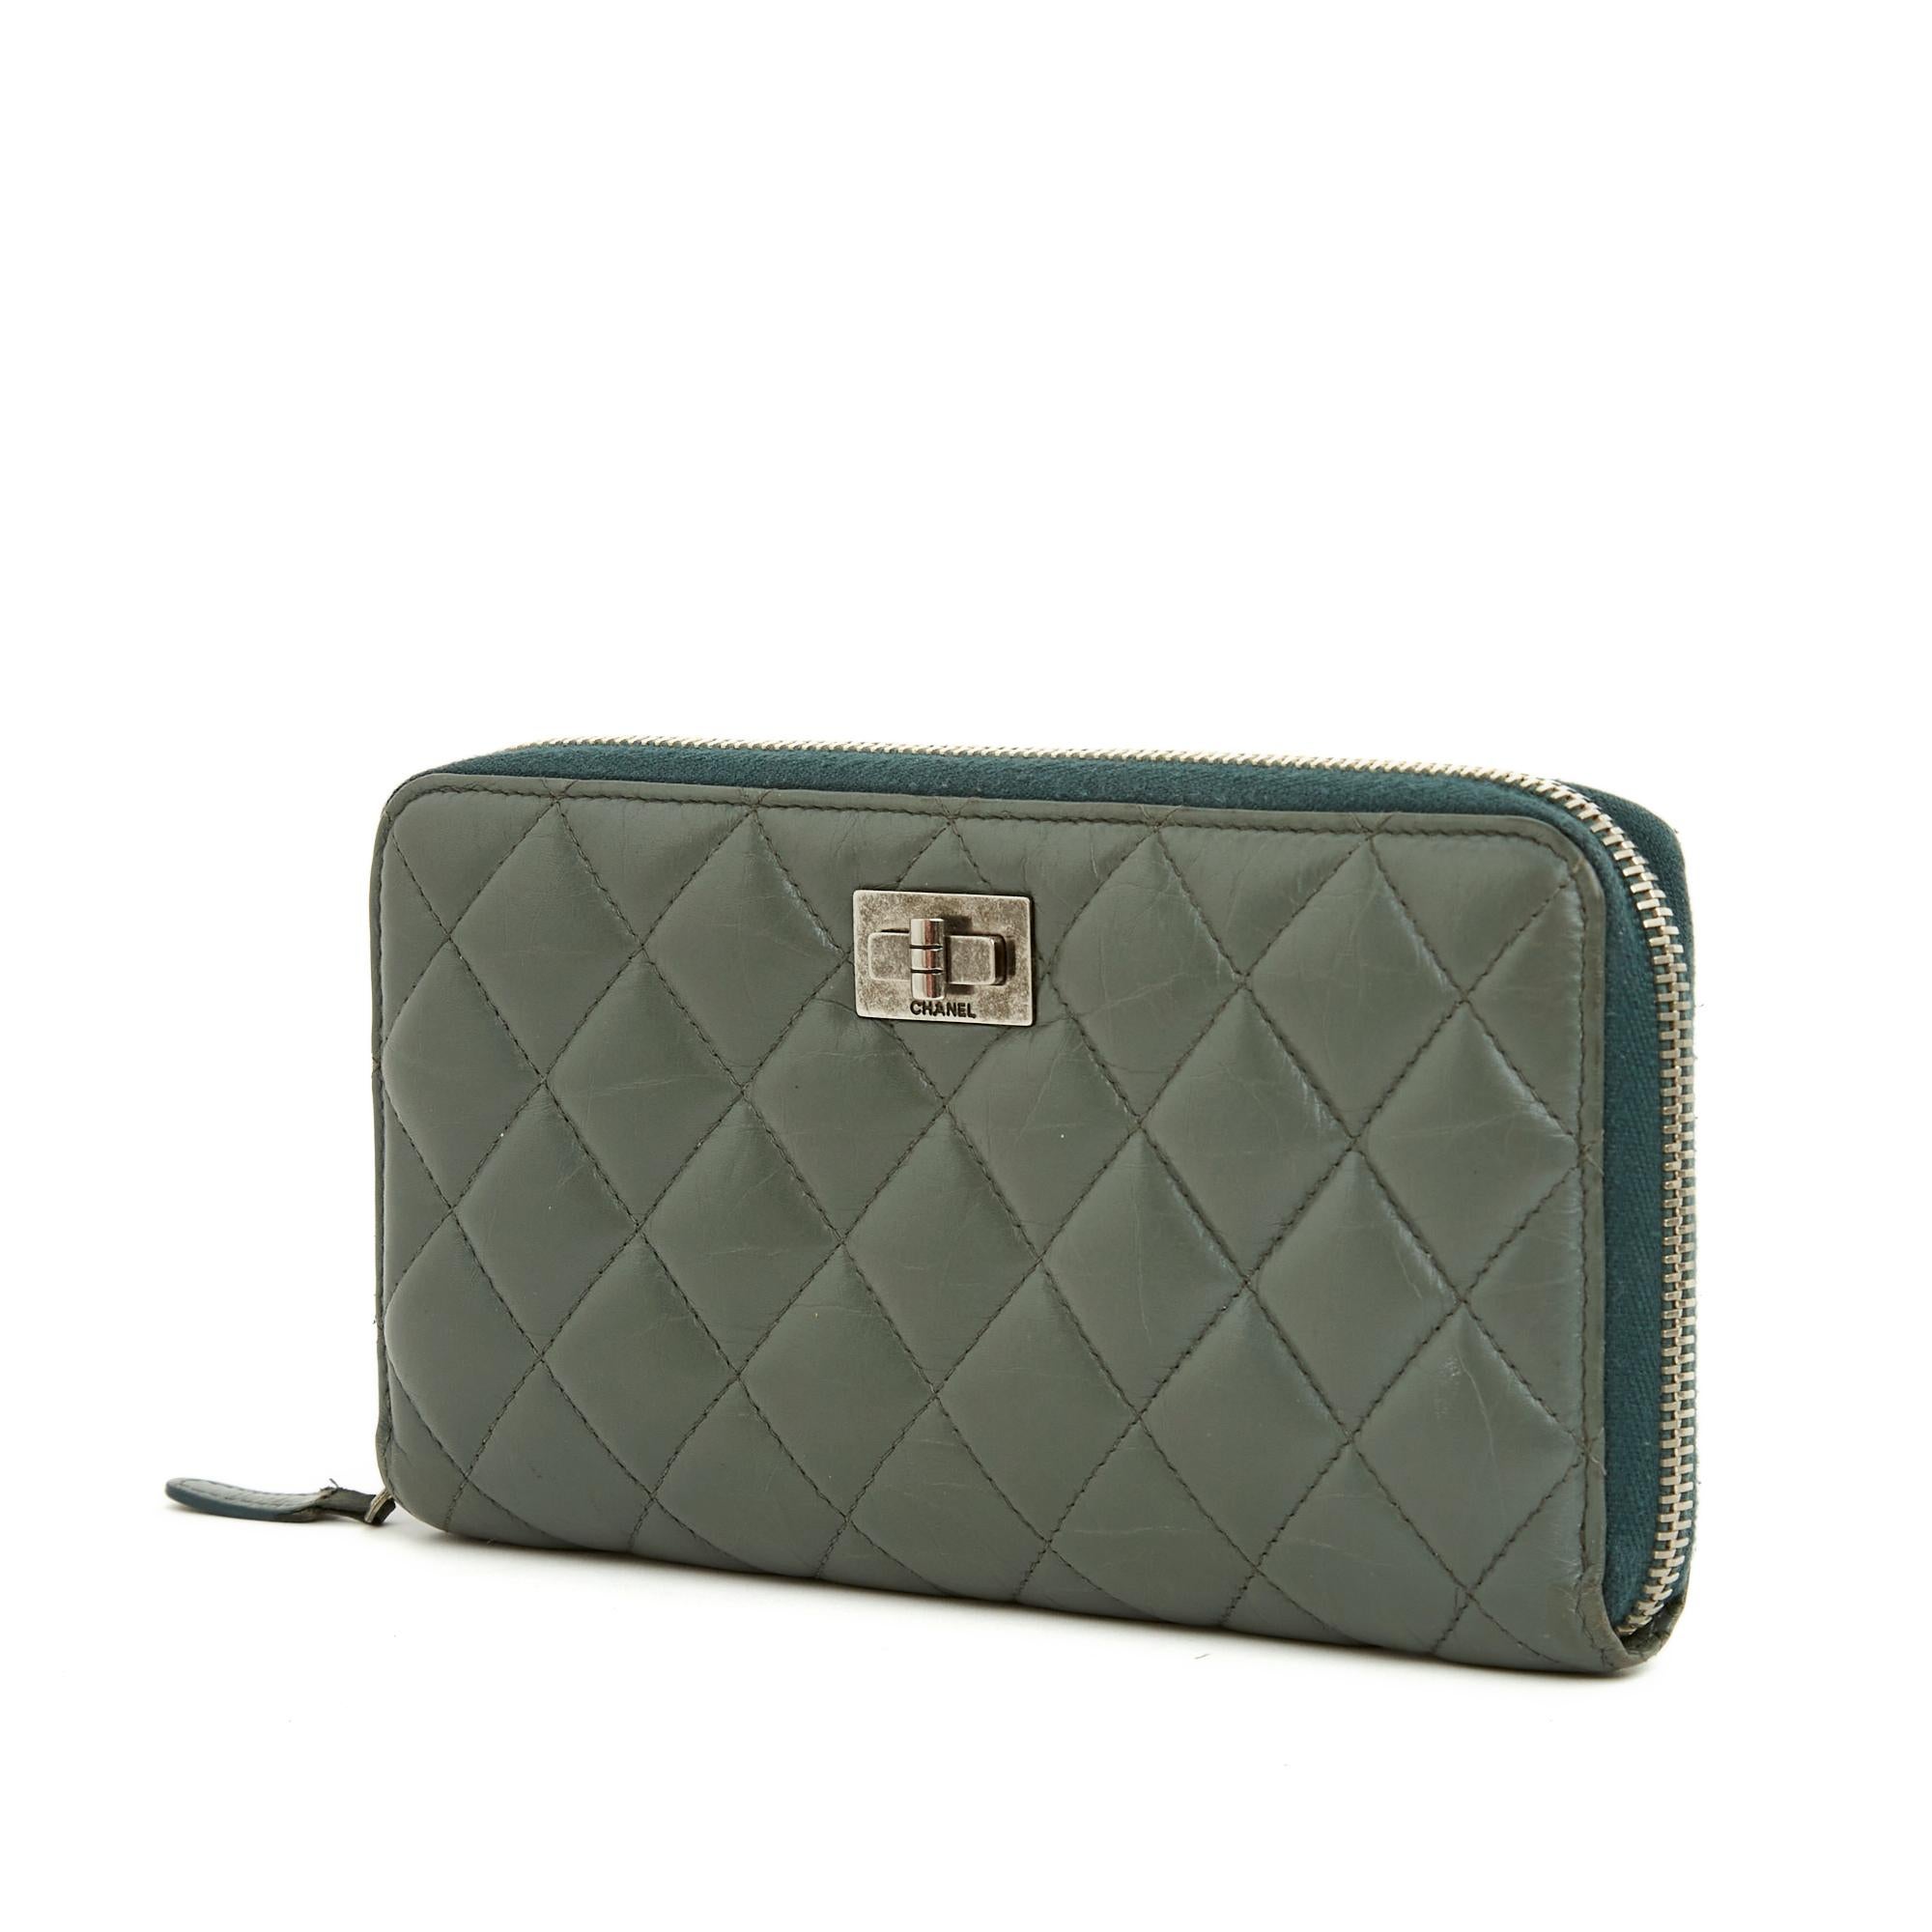 Long zipped wallet series 2.55 companion in gray khaki quilted aged leather closed with a long silver metal zip, interior in coordinated canvas and leather with 12 card slots, 3 note or paper slots and a central coin purse closed with a zip. . Width